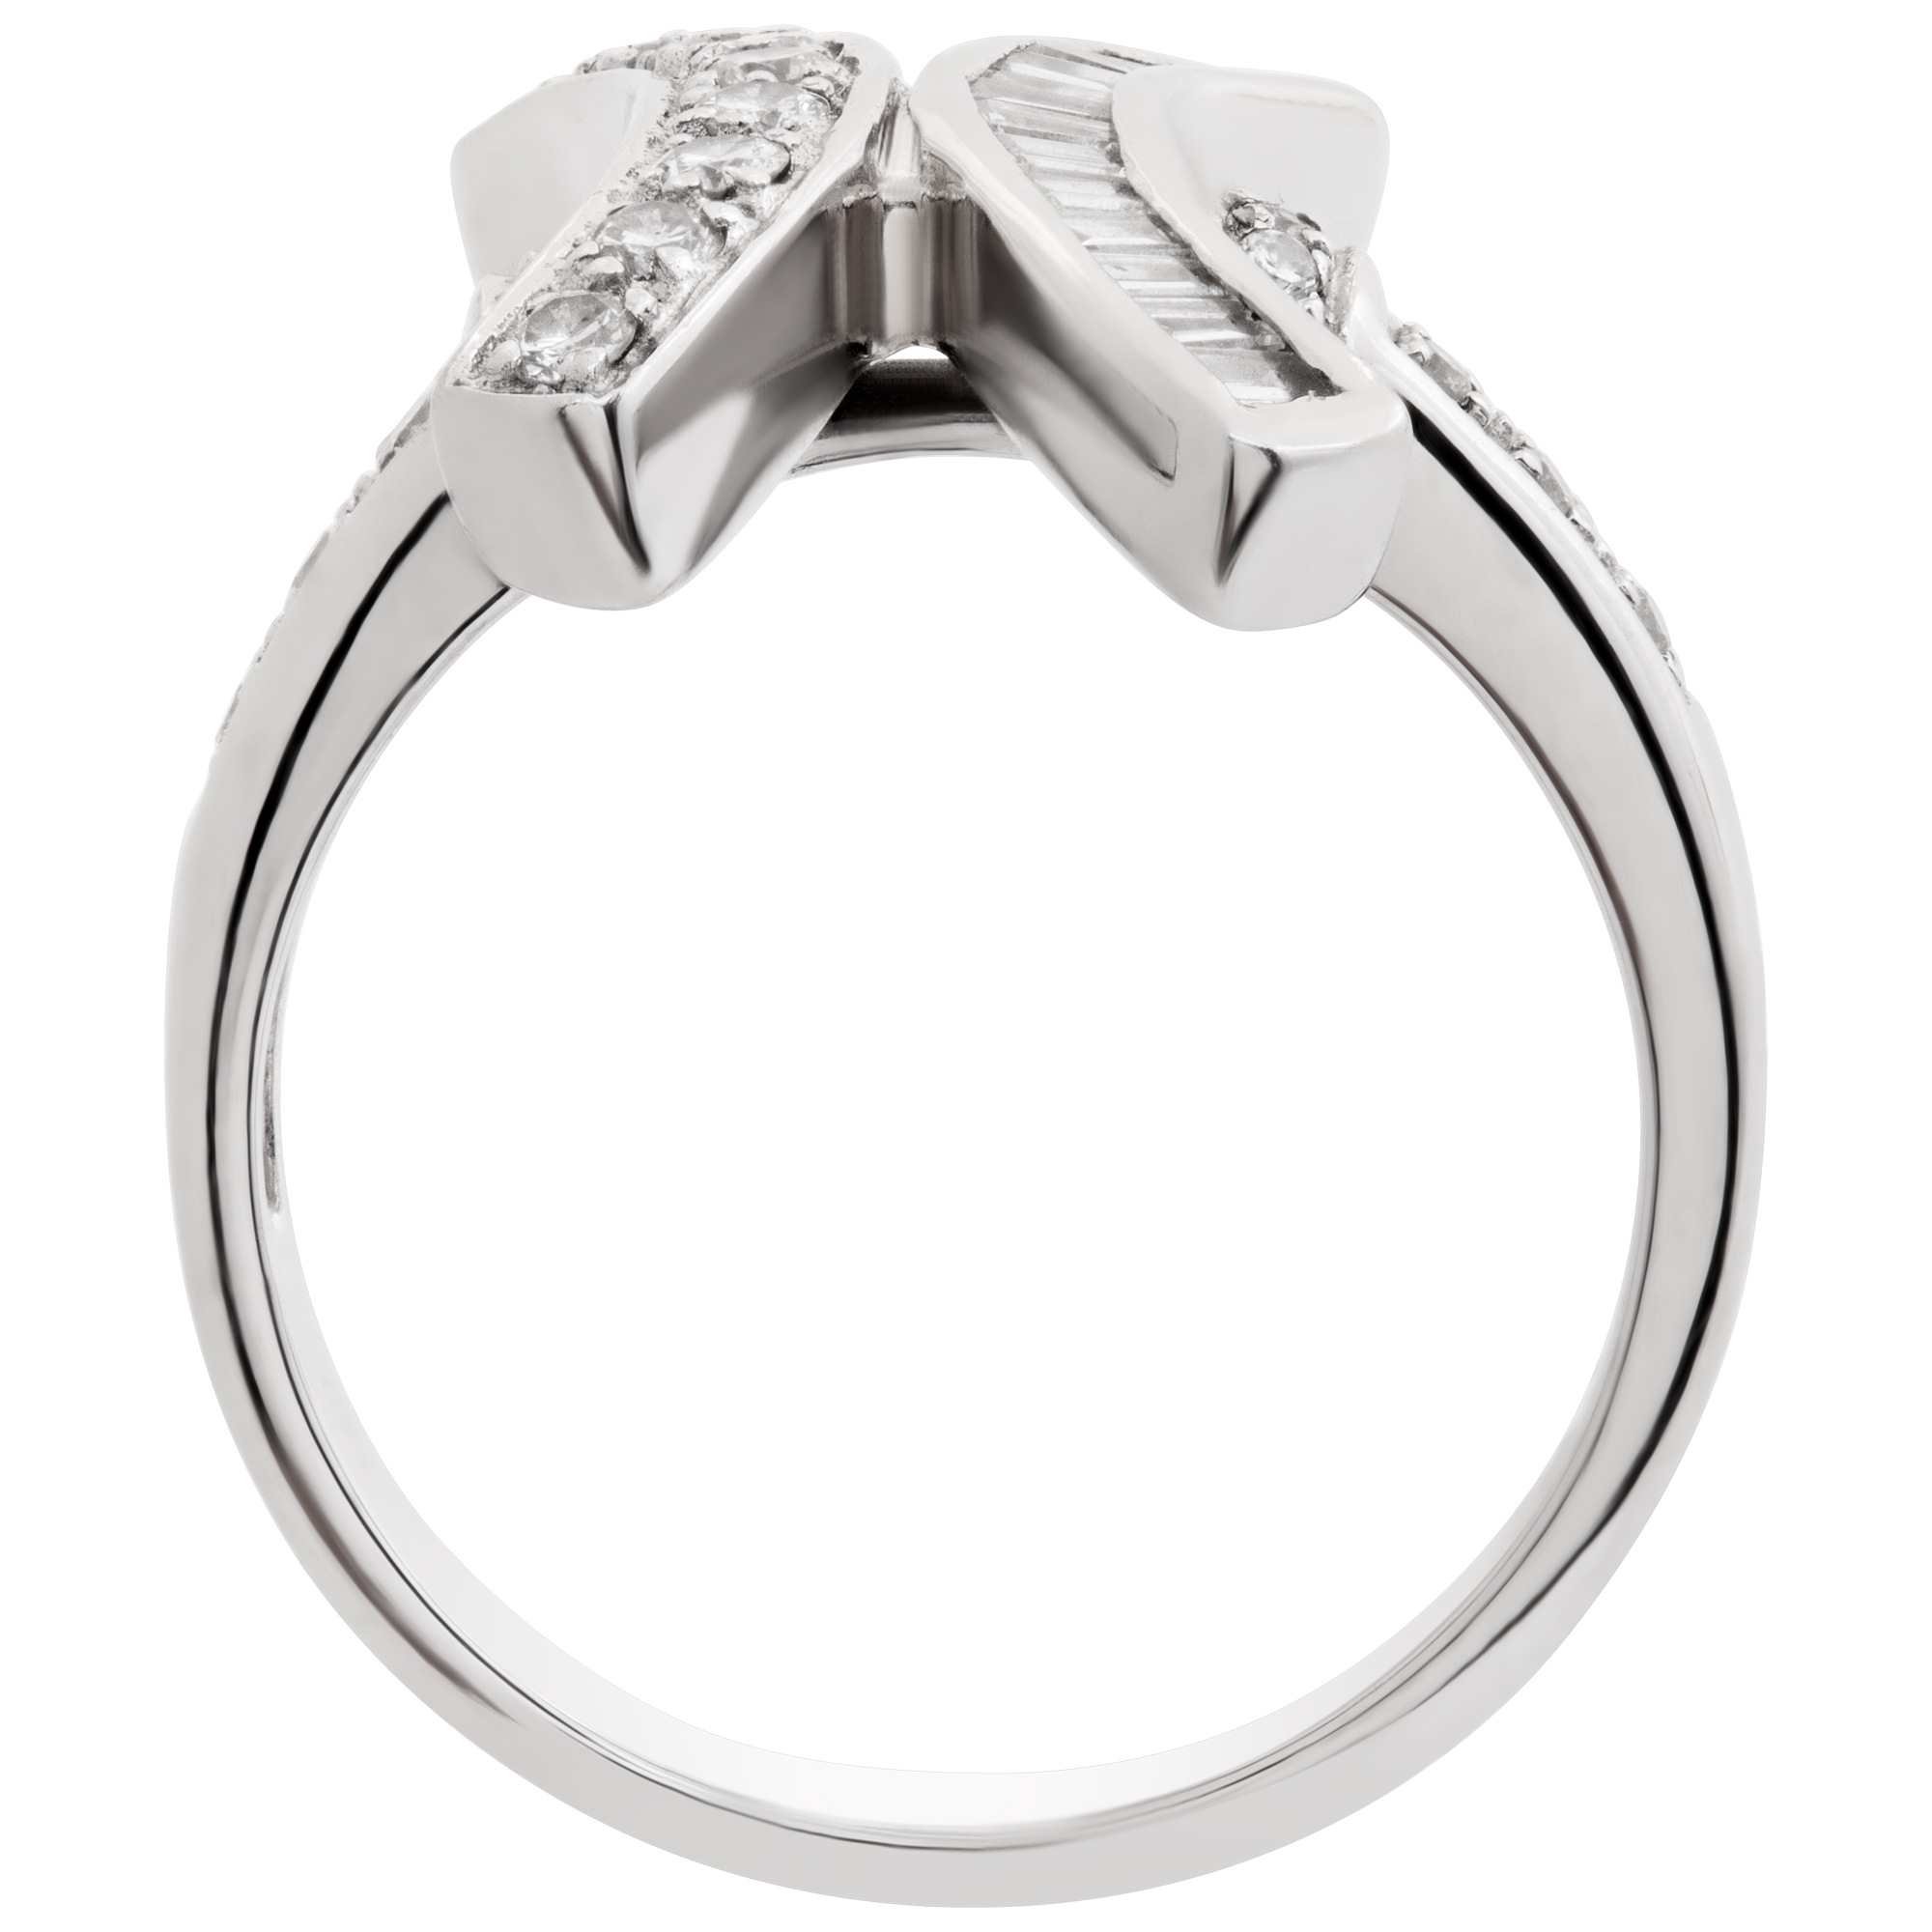 "X" shaped diamond ring in 18k white gold. 0.30 carats in diamonds. size 6 image 4